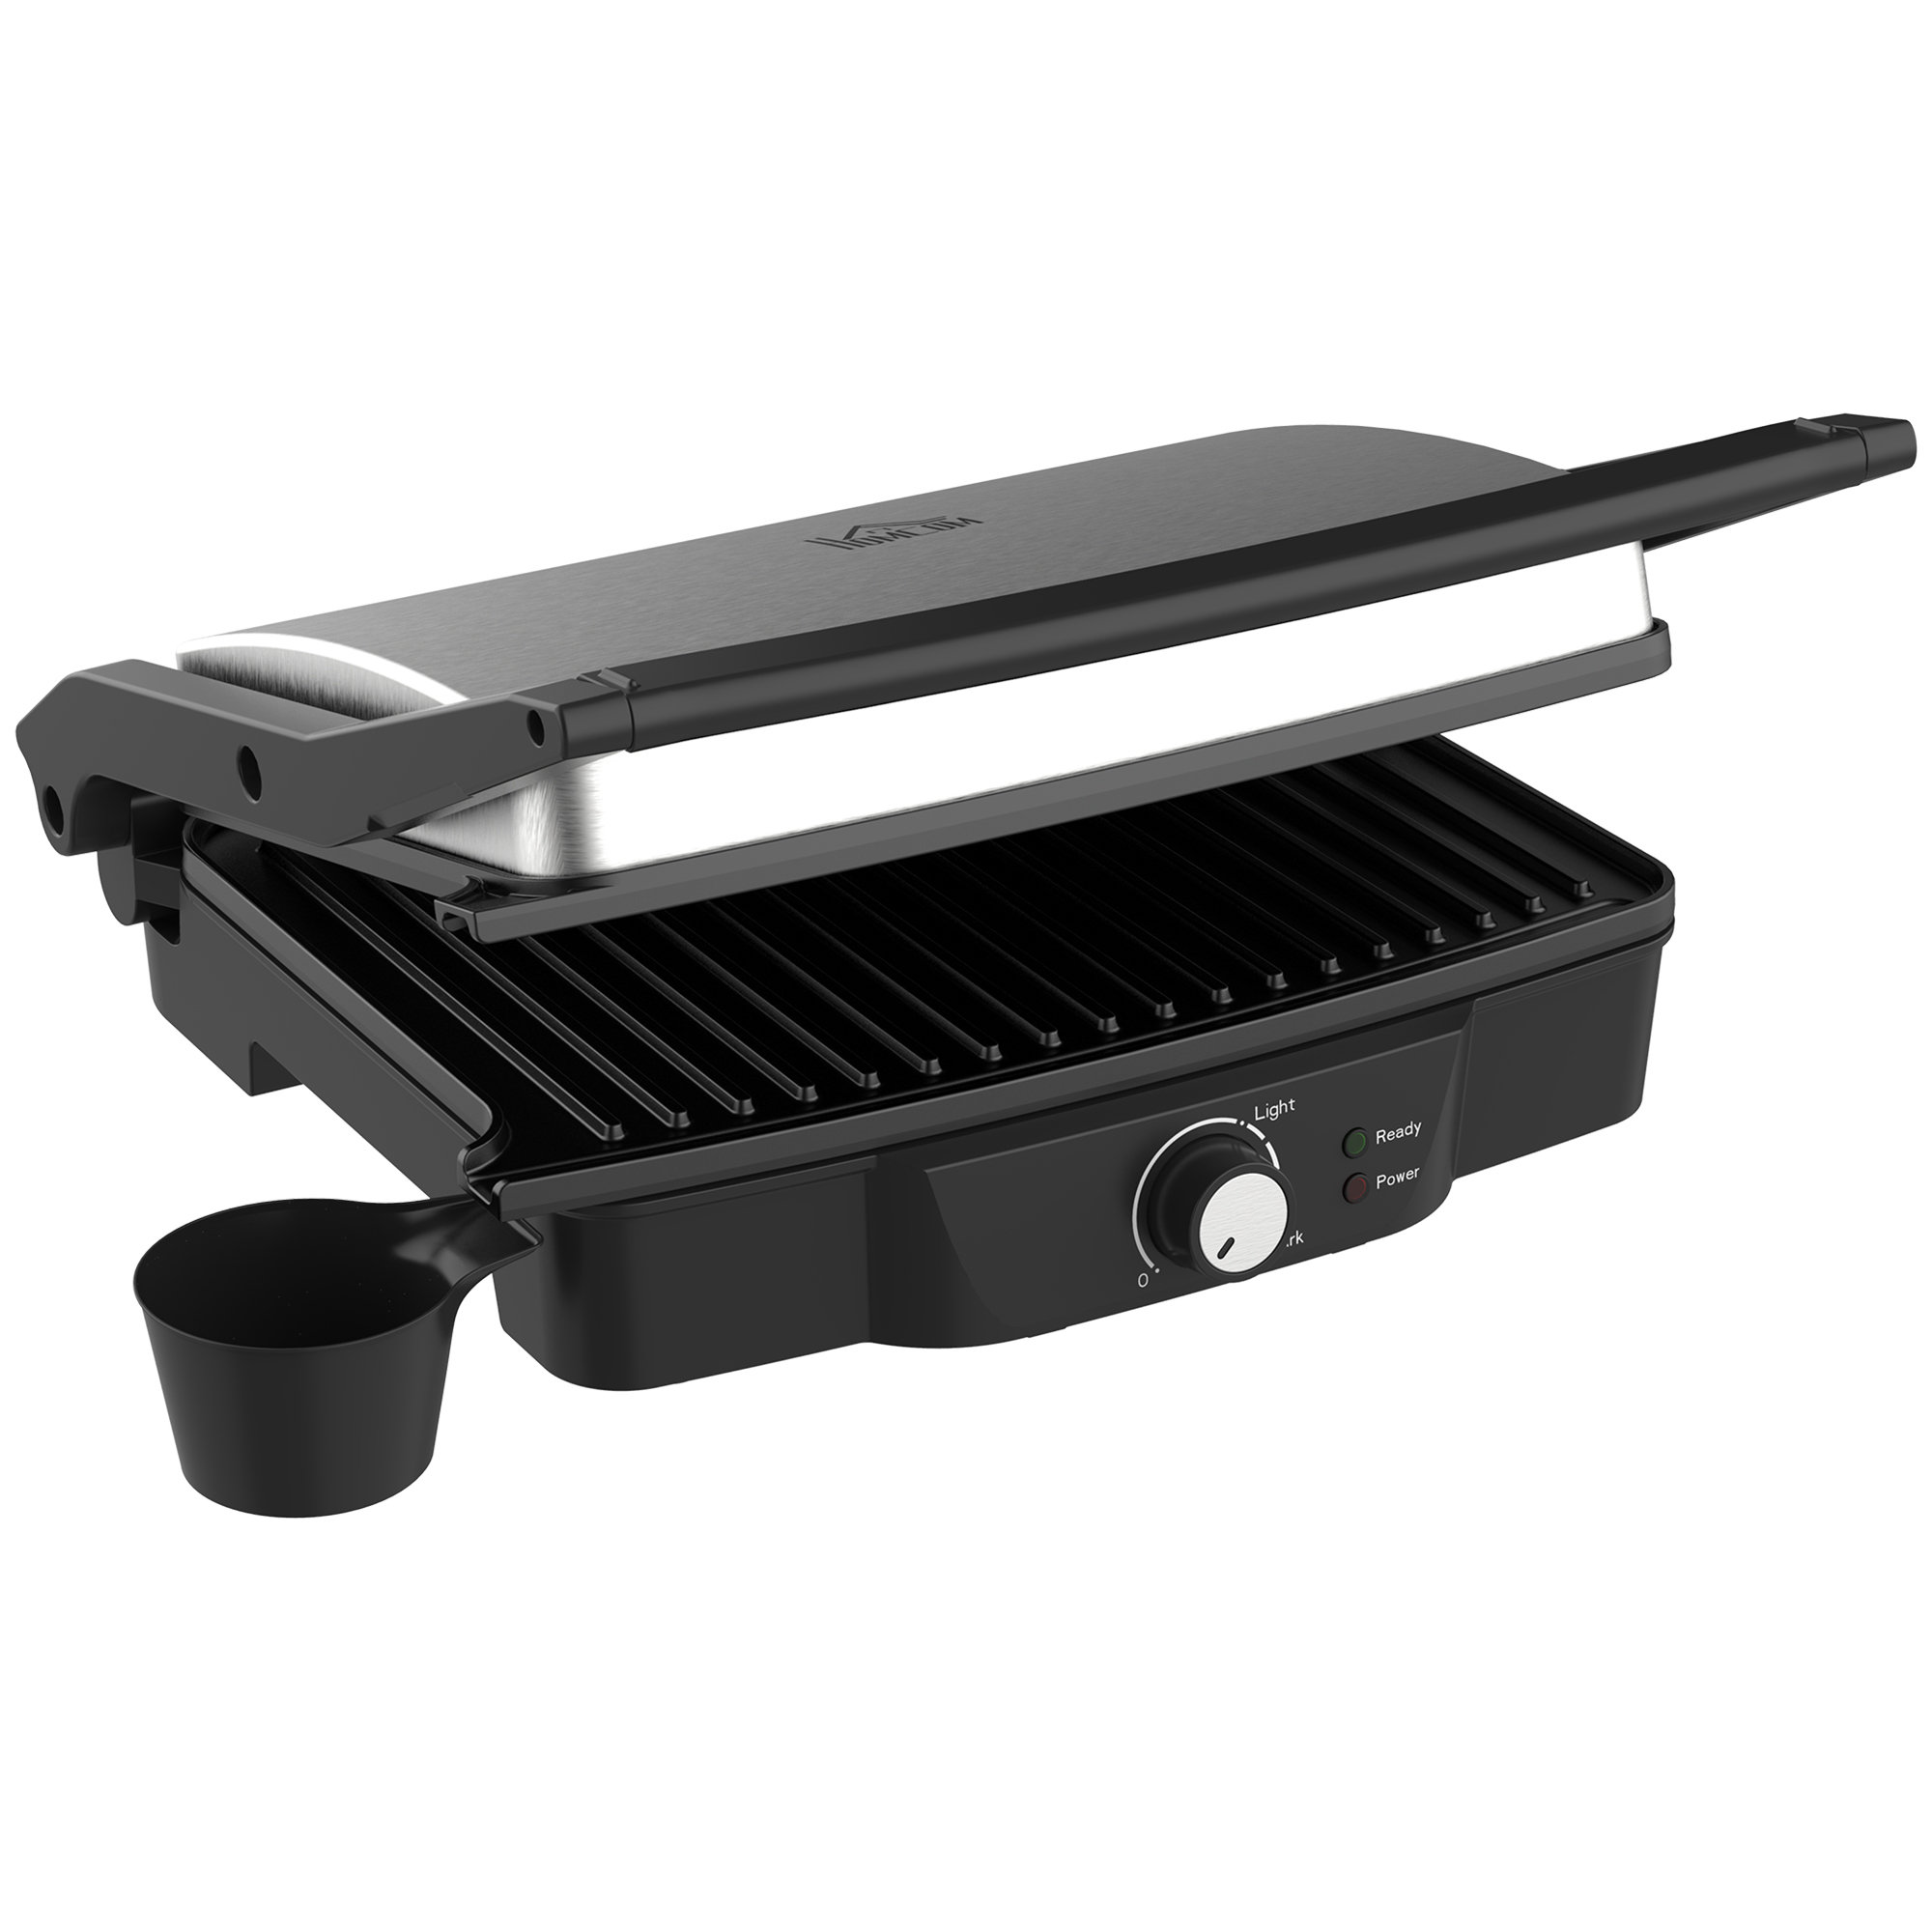 MegaChef Reversible Indoor Grill and Griddle with Removable Glass Lid 